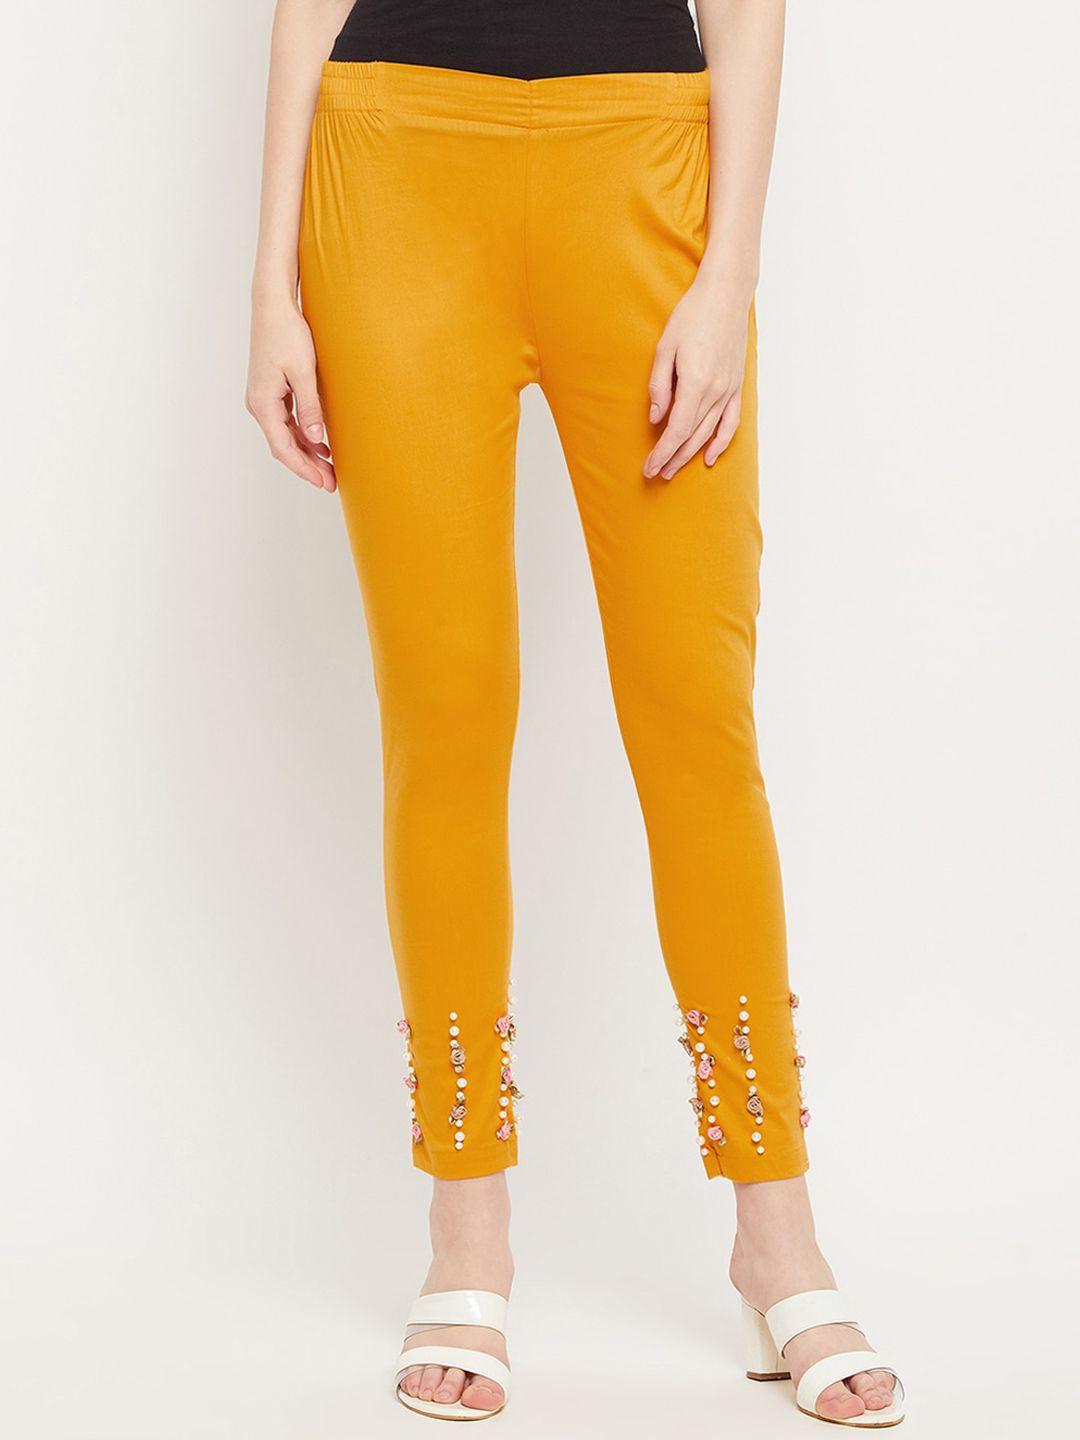 clora-creation-women-mustard-yellow-embroidered-smart-easy-wash-cotton-cigarette-trousers